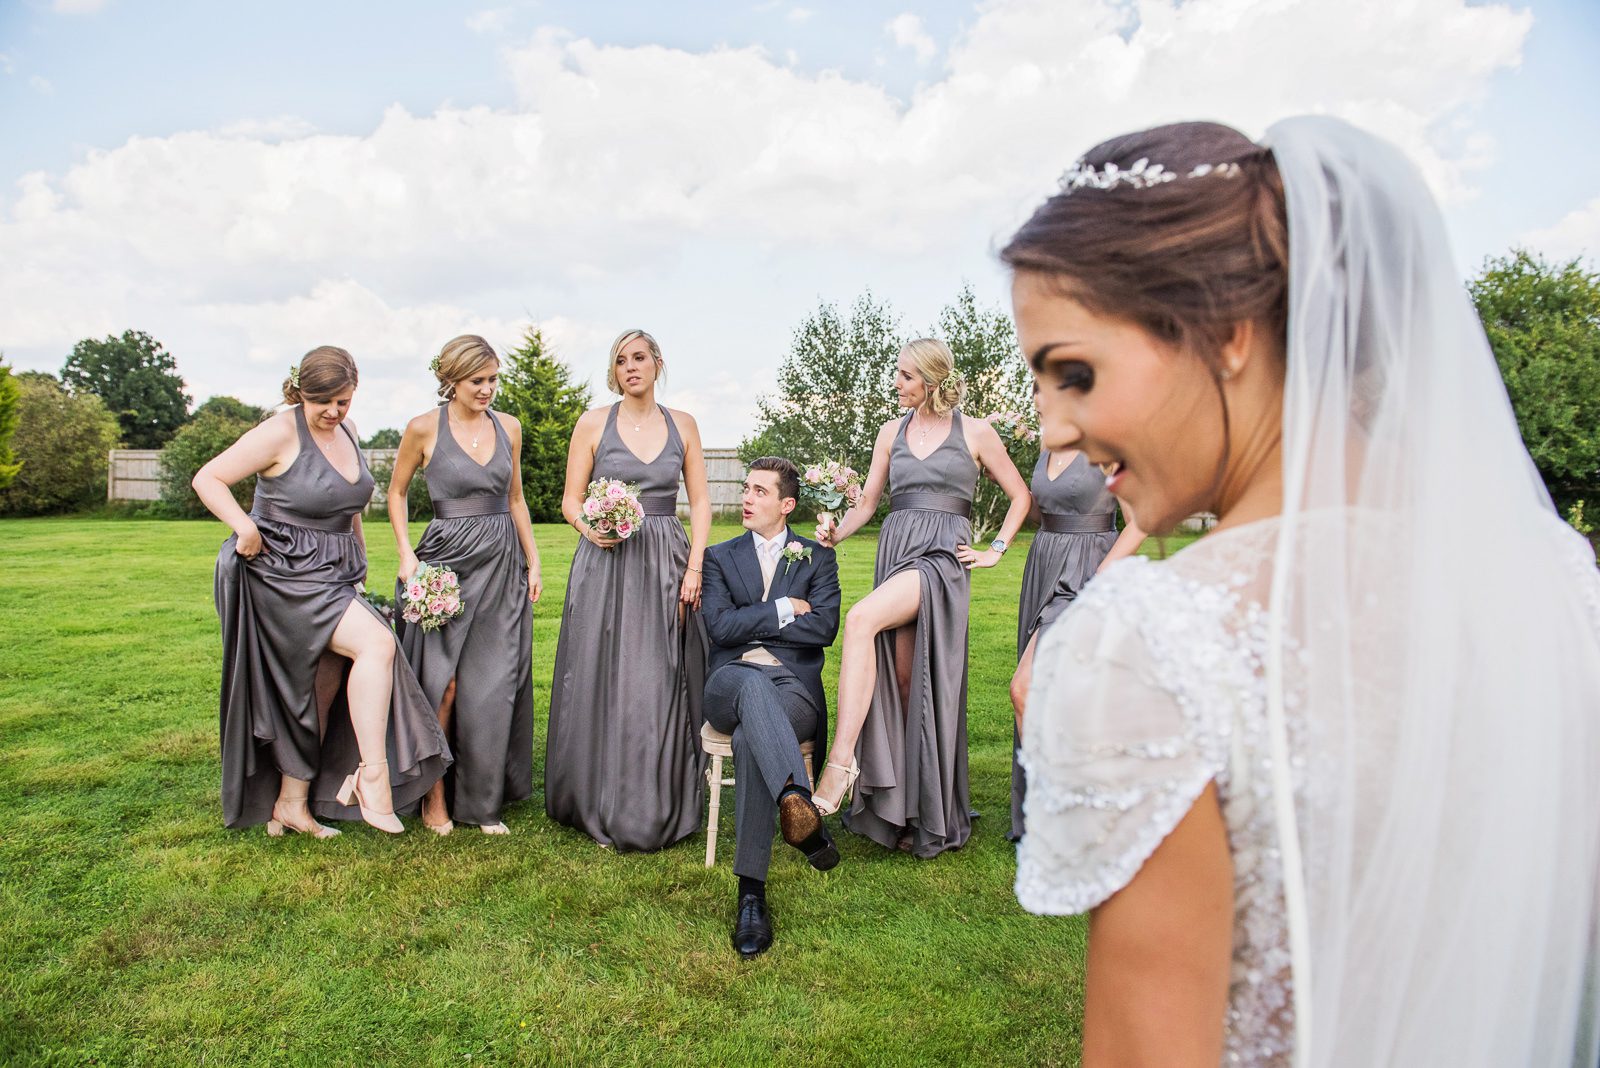 The groom with the bridesmaids in an alternative group shot for a Berkshire wedding.